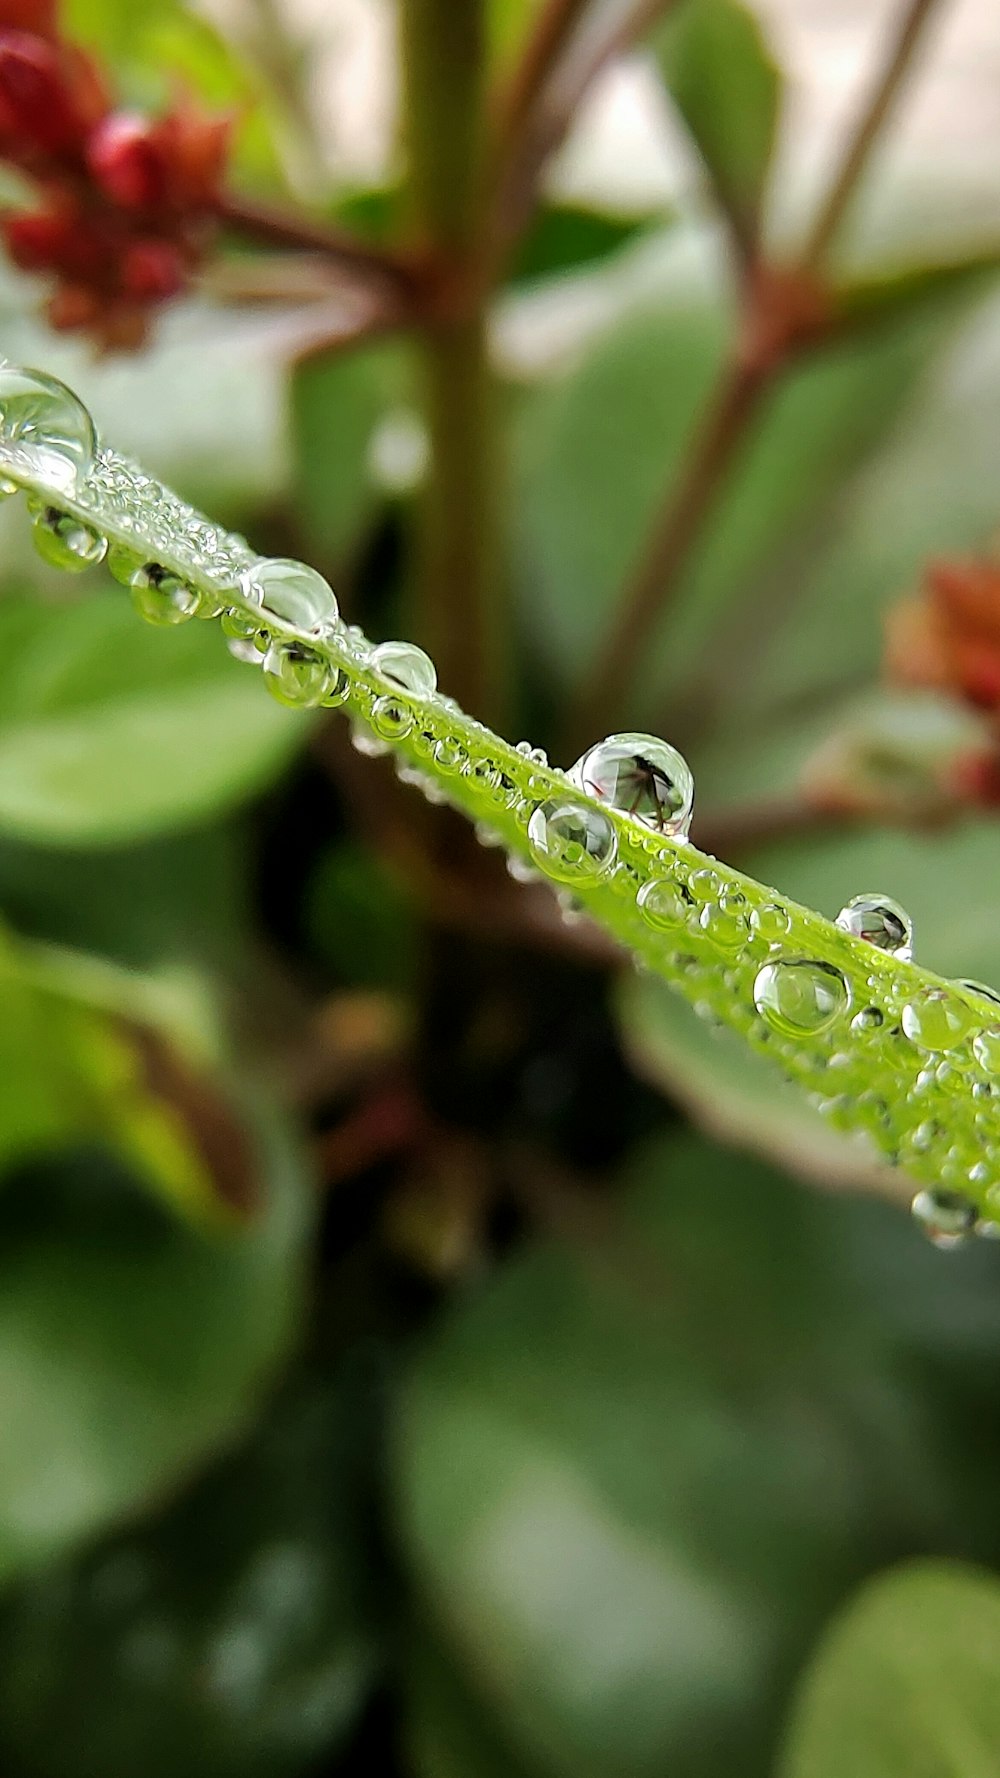 a close up of a water droplet on a plant